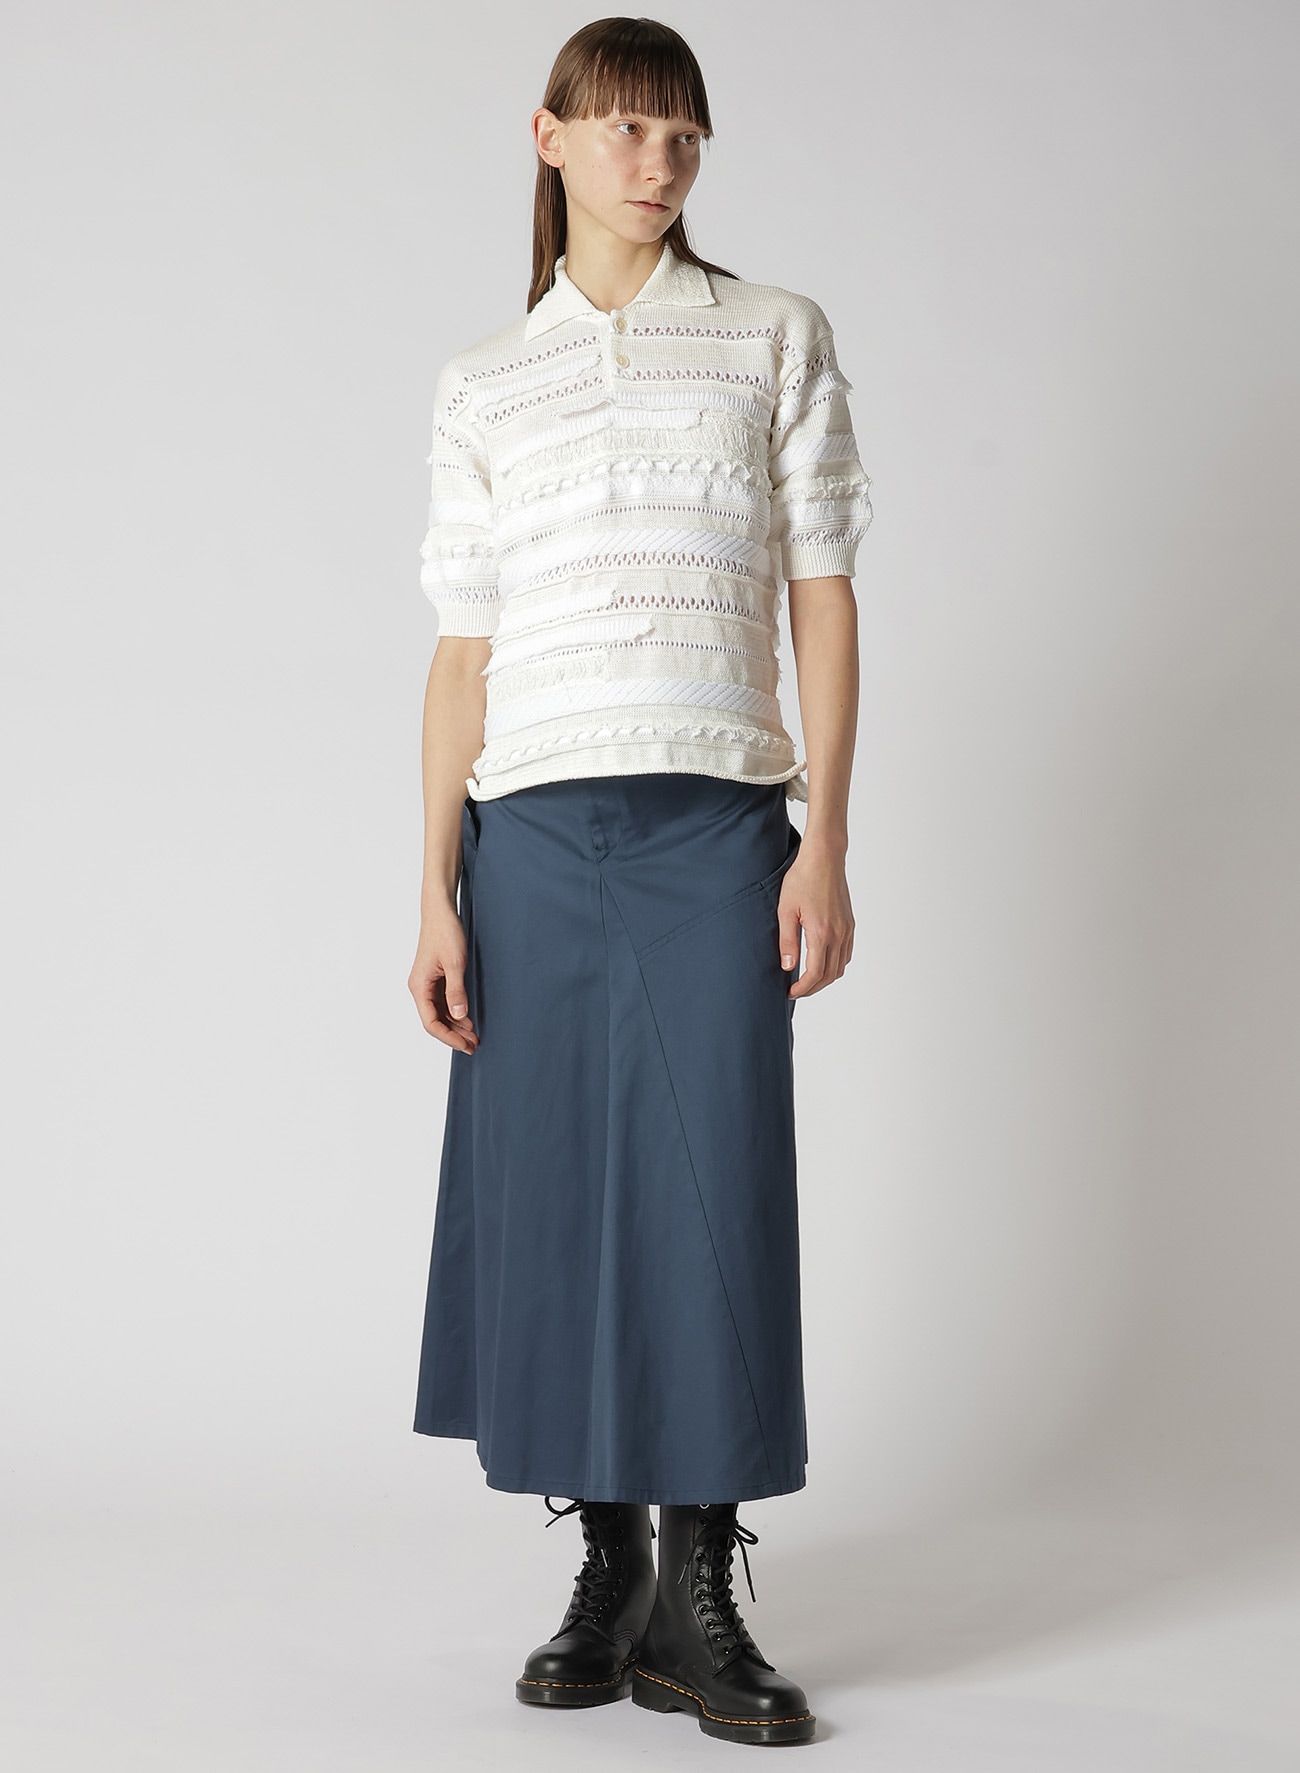 Y's BORN PRODUCT] COTTON TWILL FLARE GUSSET FLARE SKIRT(XS Blue 